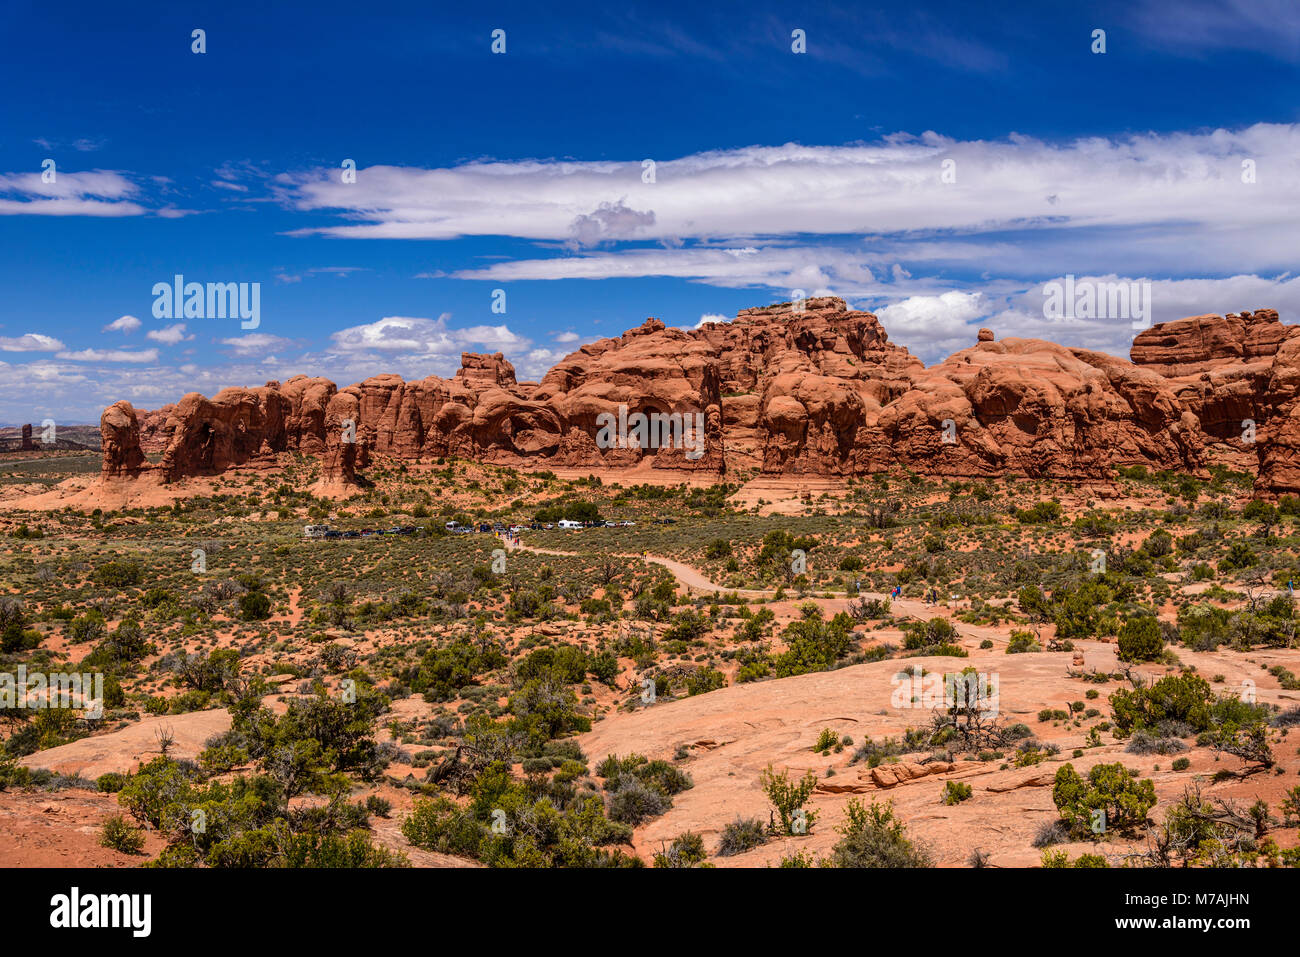 The USA, Utah, Grand county, Moab, Arches National Park, The Windows Section, Parade of Elephants with Double Arch Stock Photo